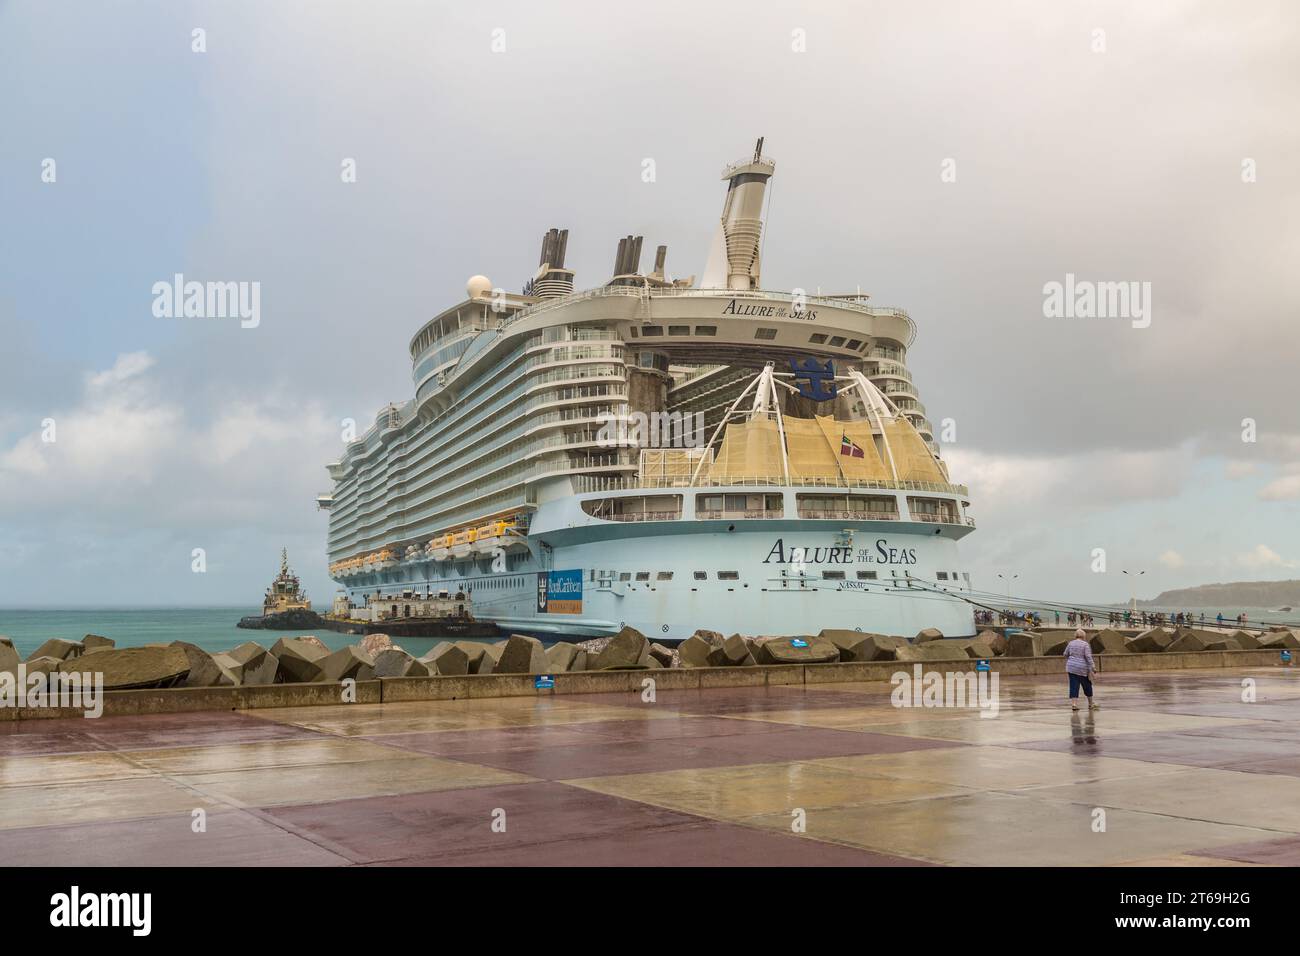 Royal Caribbean Allure of the Seas being refueled from a fuel barge on a rainy morning at the port of Phillipsburg, St. Maarten in the Caribbean Stock Photo